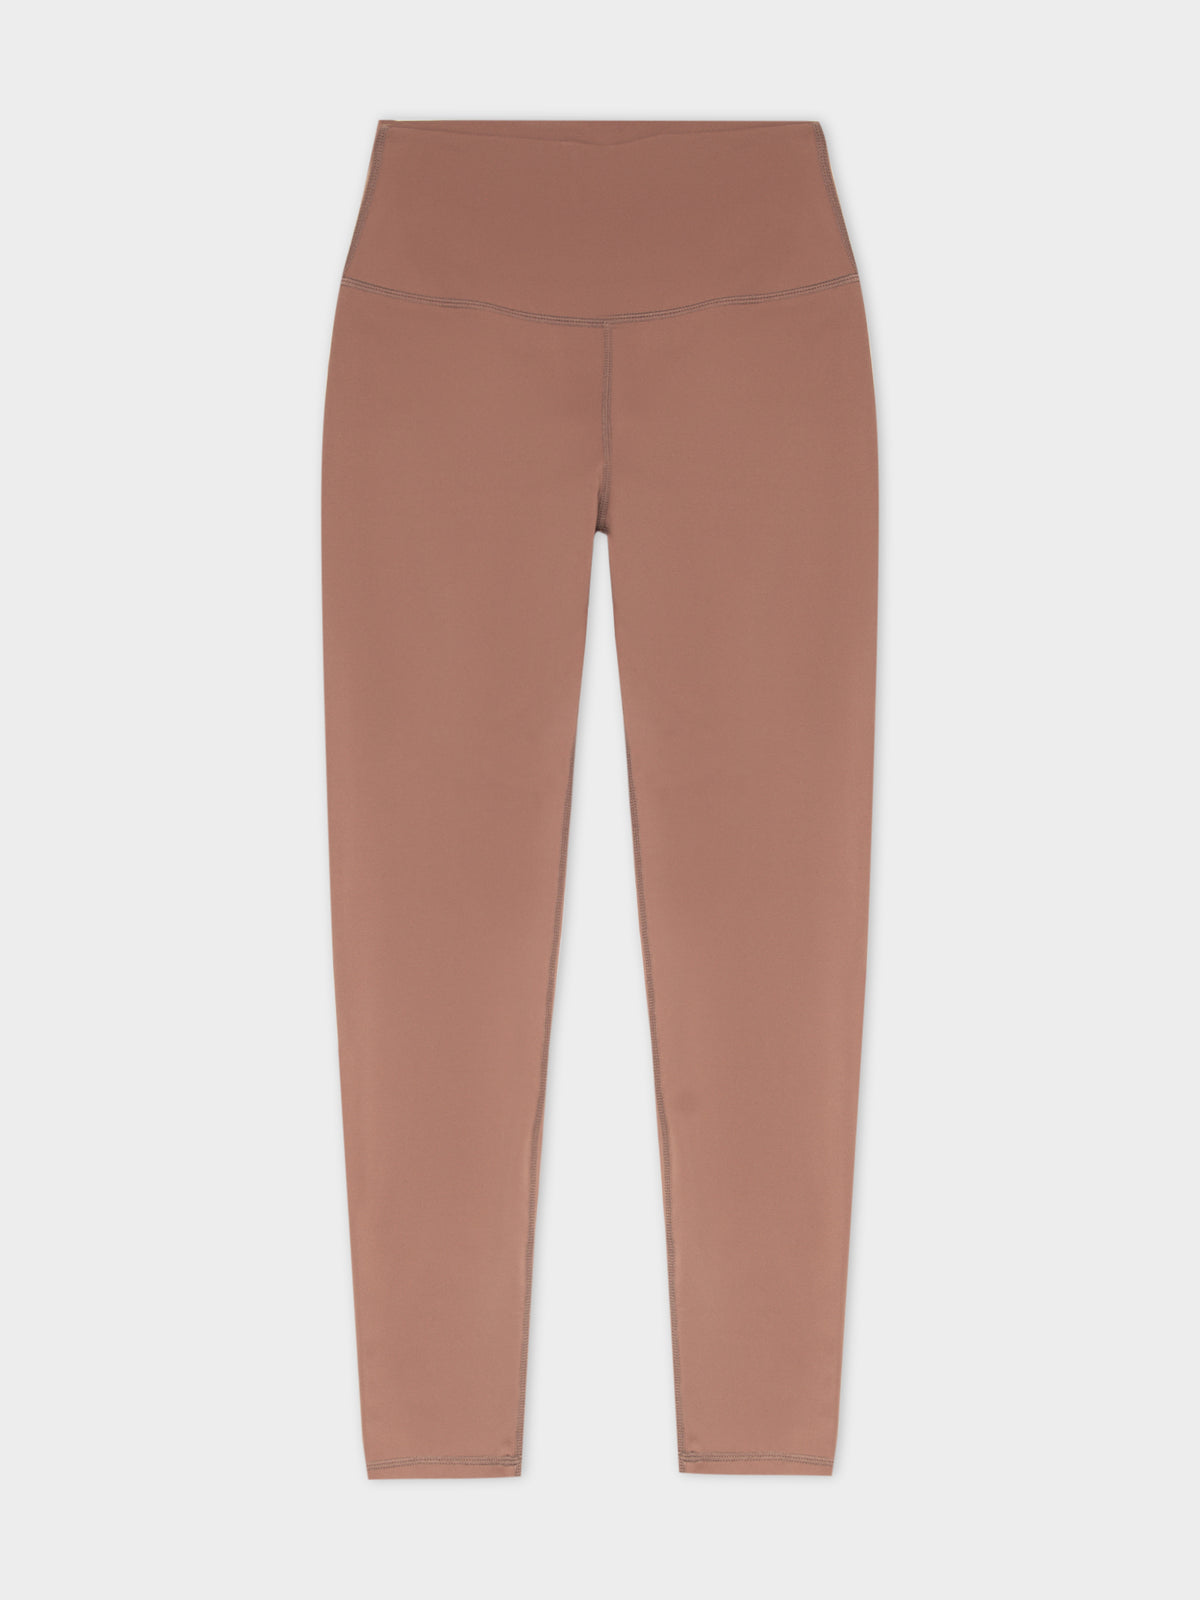 Nude Active High-Rise 7/8 Leggings in Rosewood